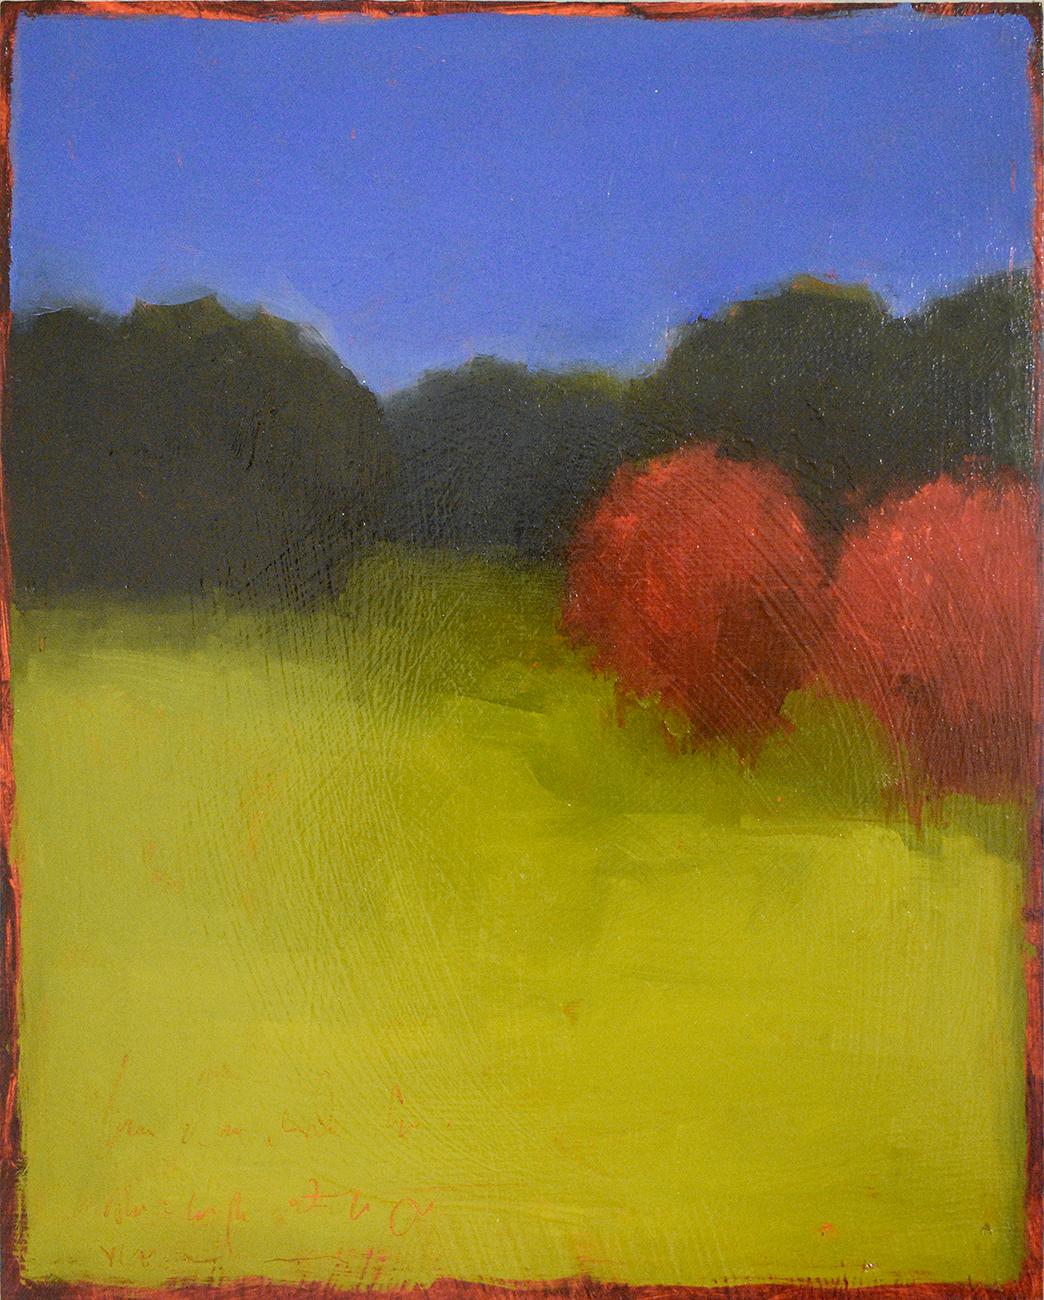 Moody Day: Abstract Landscape Painting of a Green Field, Red Trees & Blue Sky